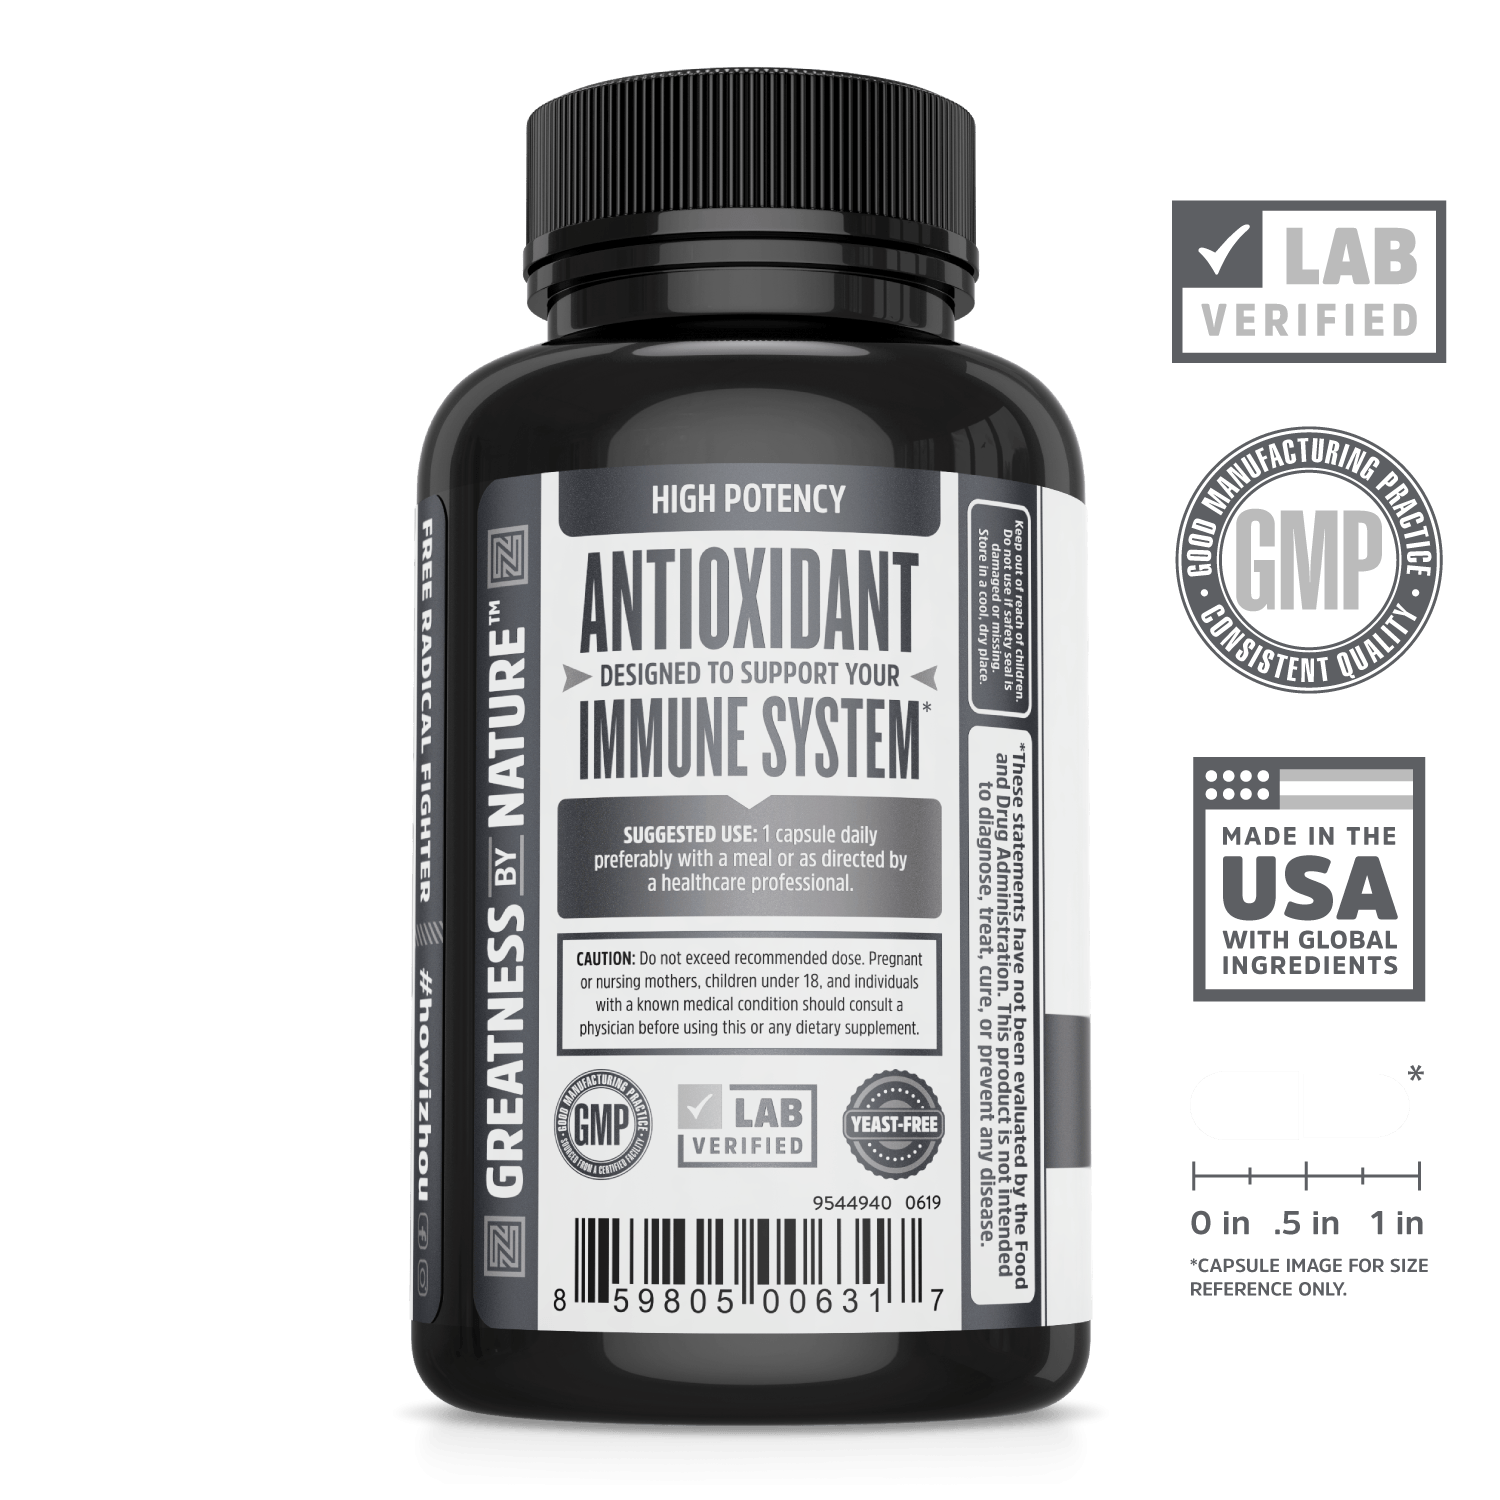 Zhou Nutrition Selenium Support Supplement.  Lab verified, good manufacturing practices, made in the USA with global ingredients.